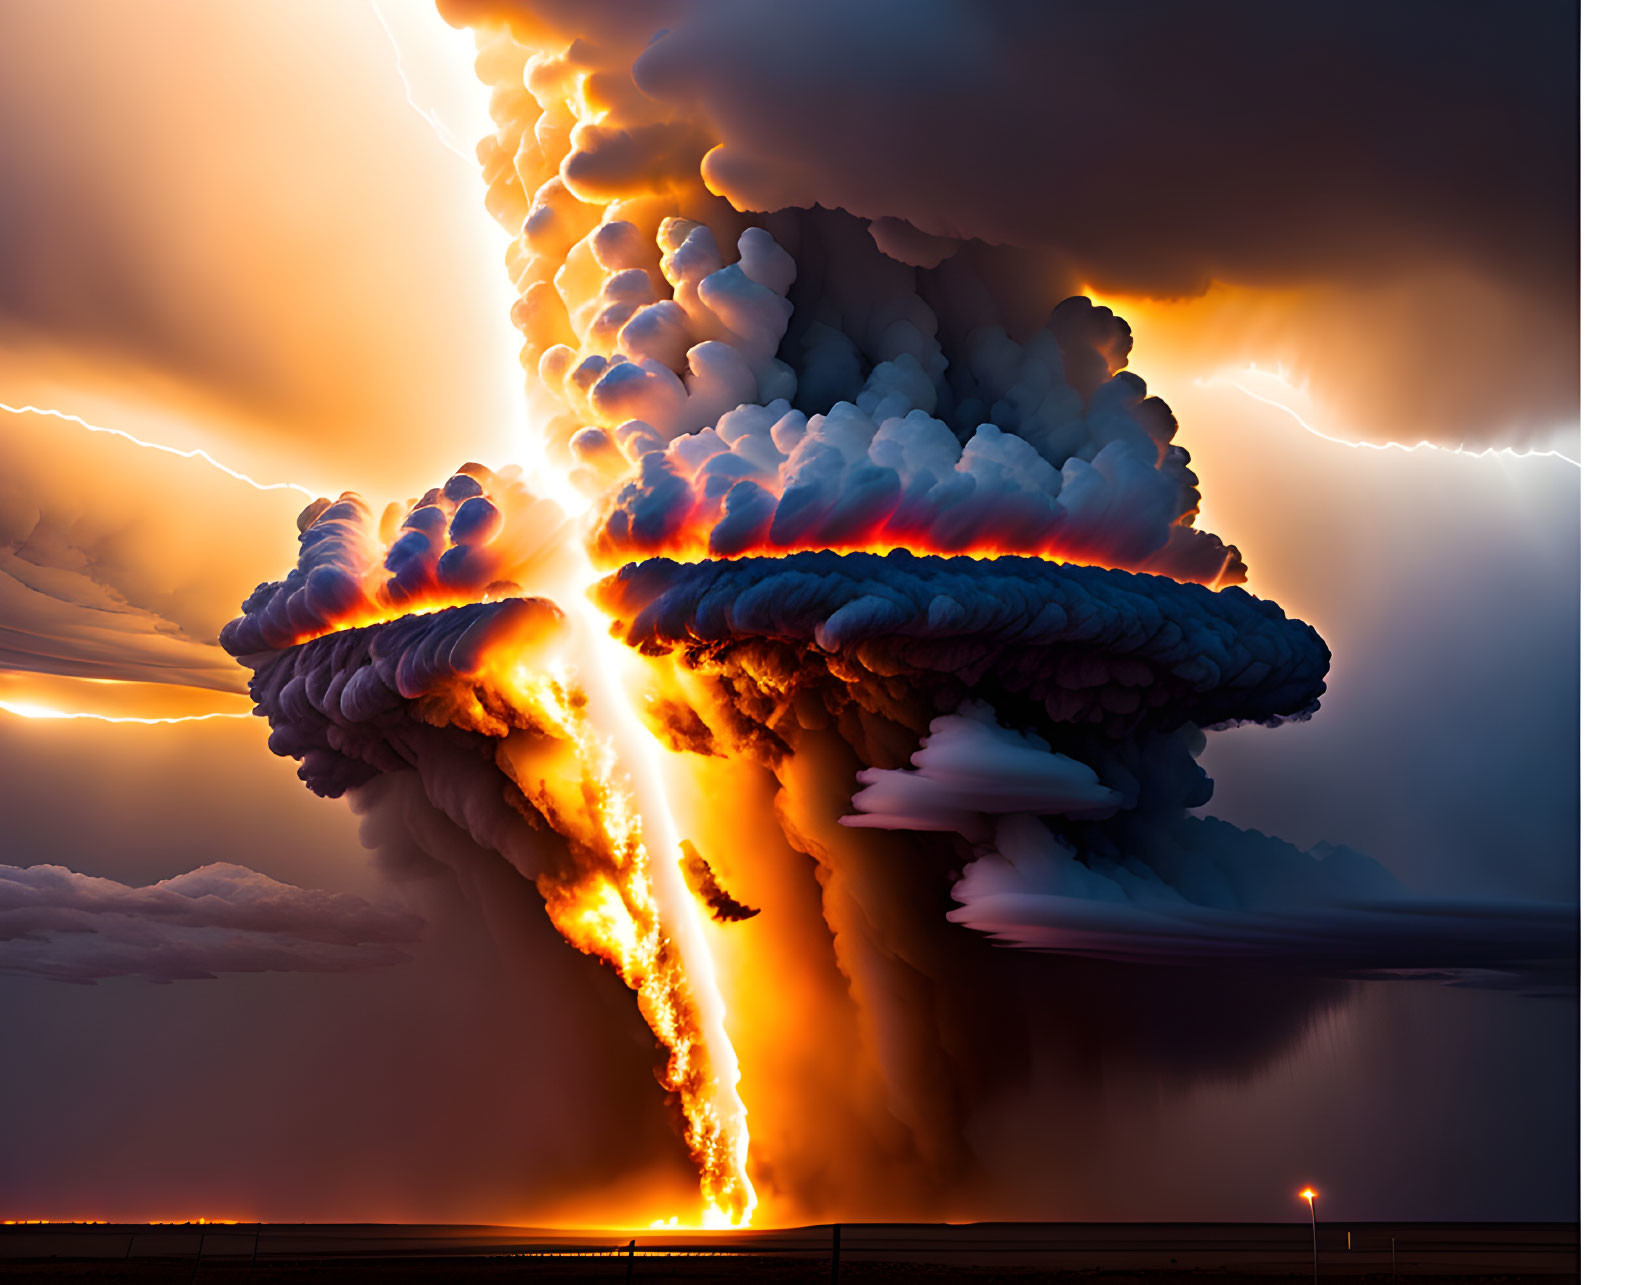 Dramatic volcanic eruption with towering ash cloud, lightning, and lava flows at dusk